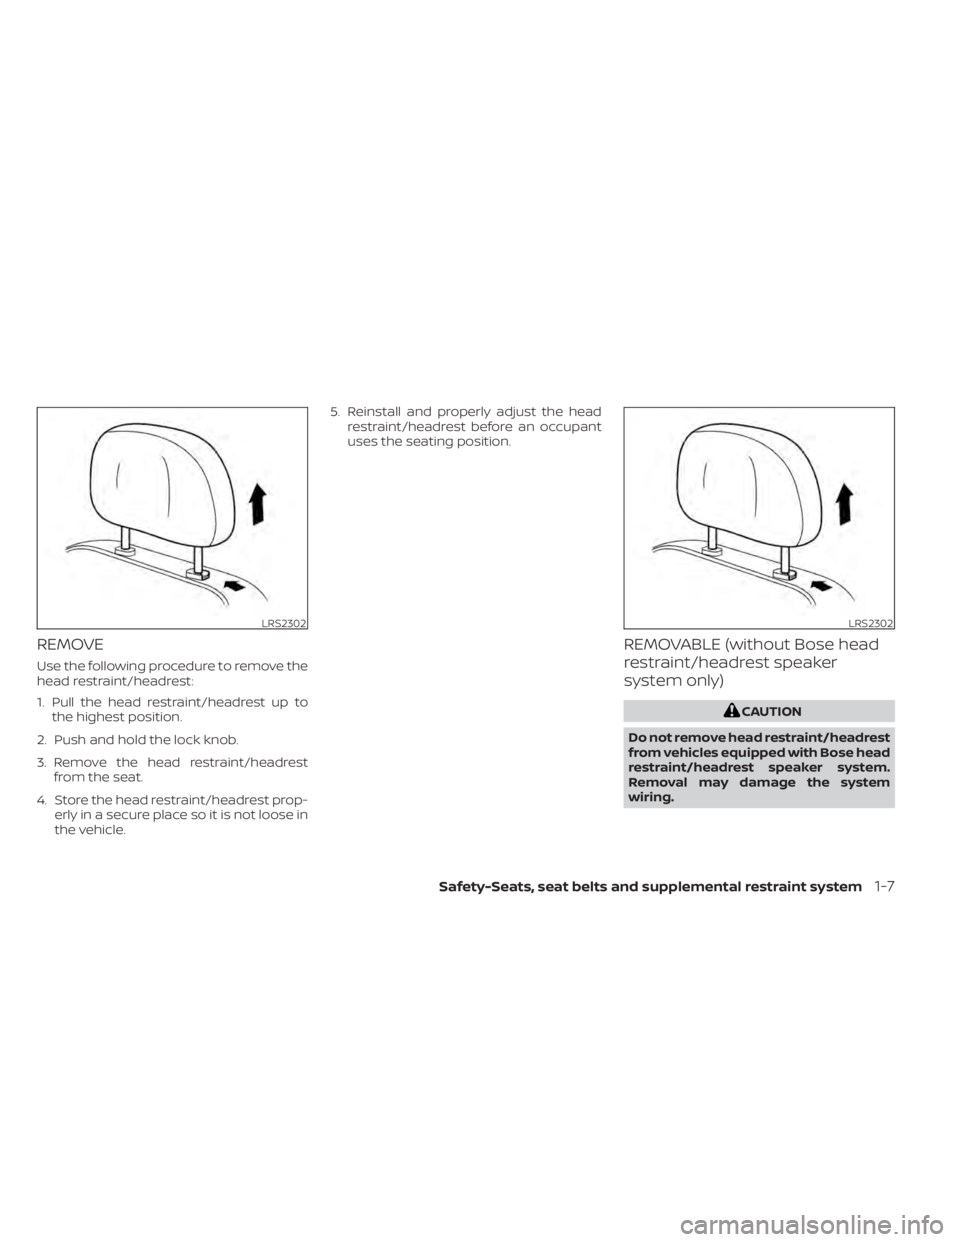 NISSAN KICKS 2022 Owners Manual REMOVE
Use the following procedure to remove the
head restraint/headrest:
1. Pull the head restraint/headrest up tothe highest position.
2. Push and hold the lock knob.
3. Remove the head restraint/he